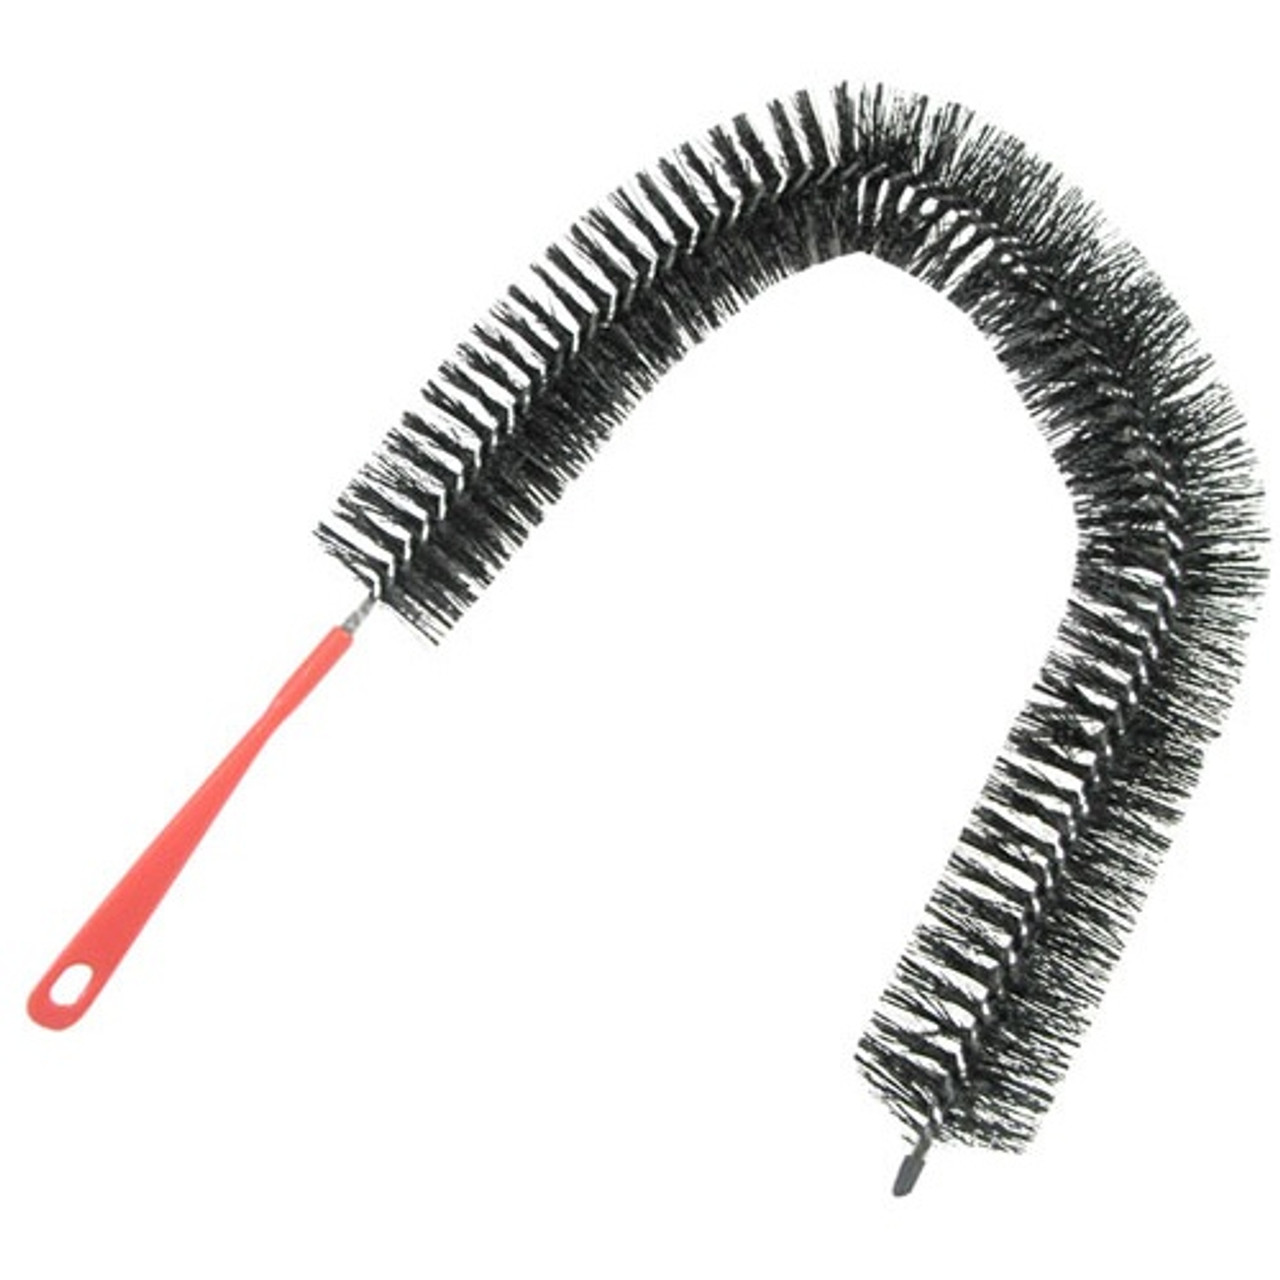 EXTRA LONG 23 APPLIANCE CLEANING BRUSH